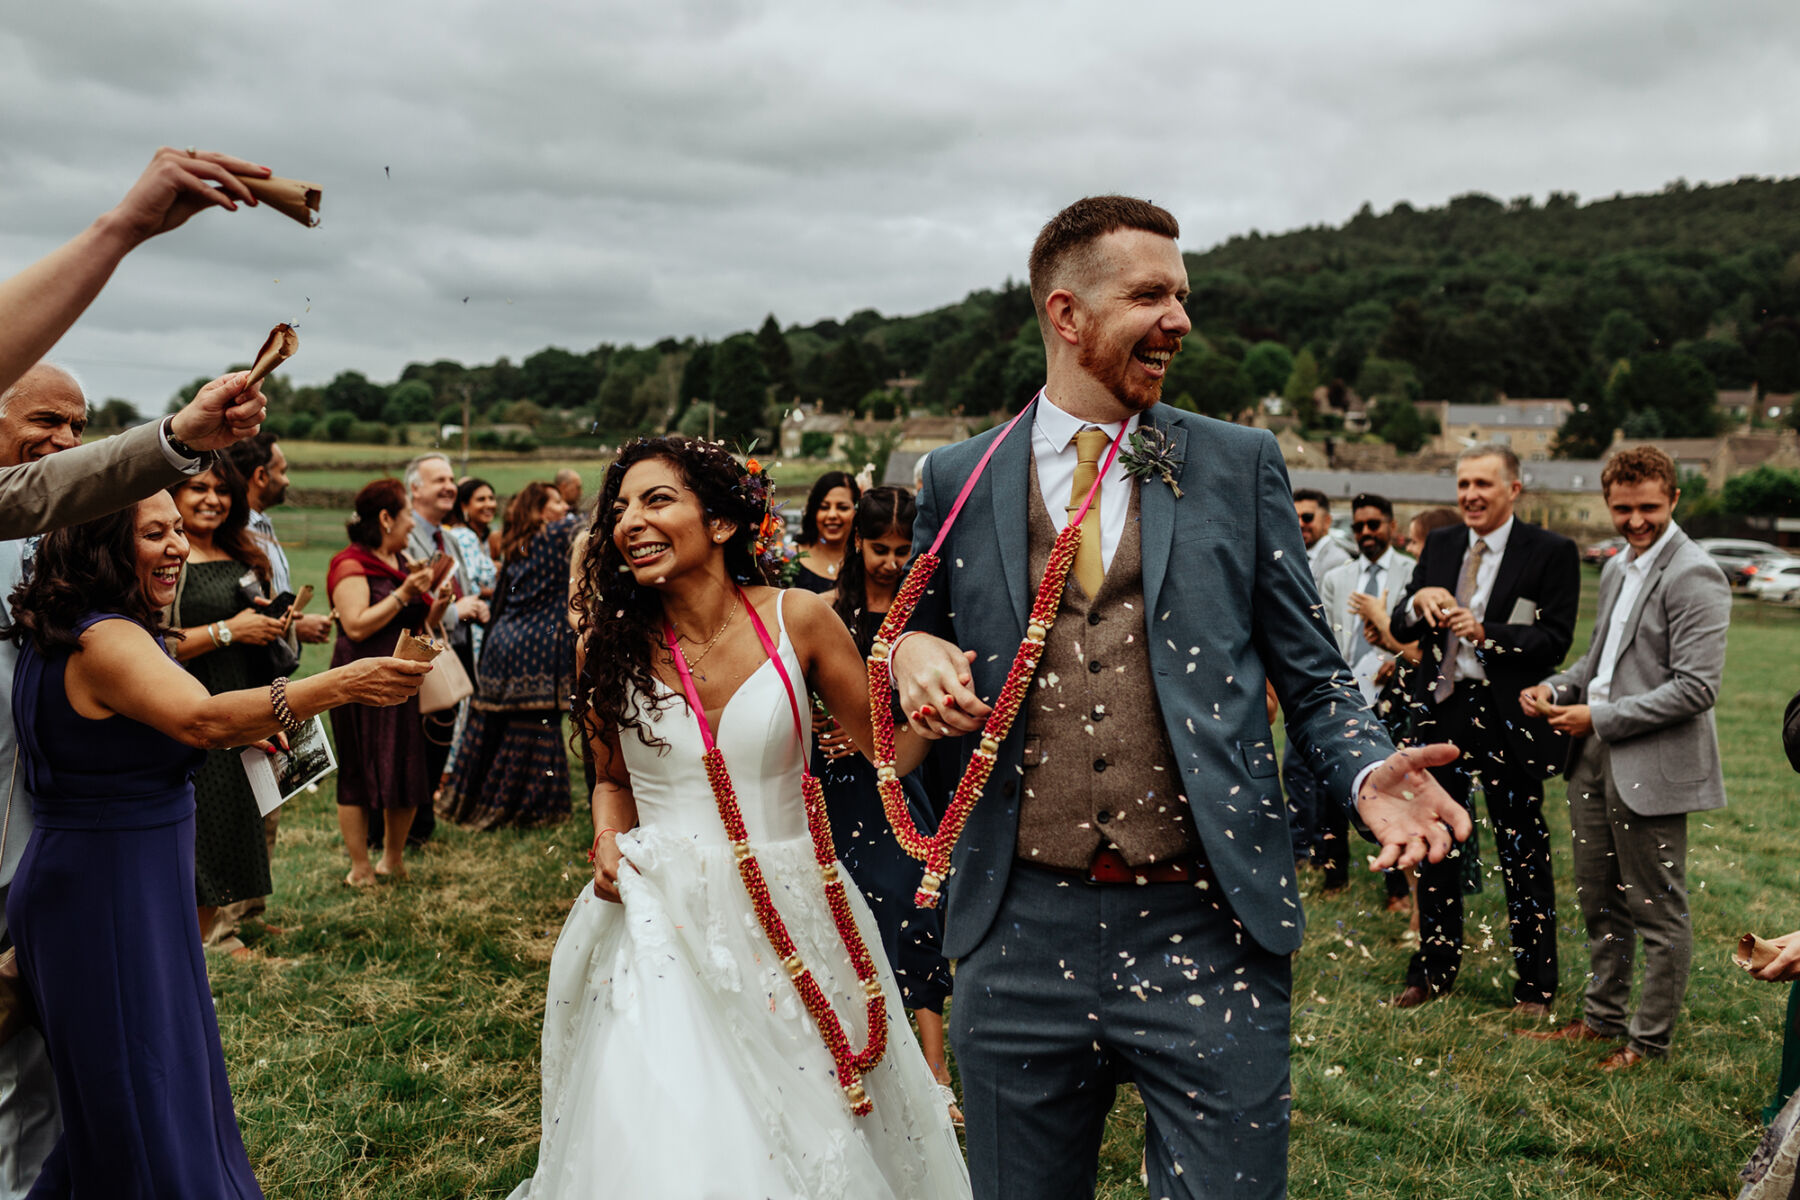 Colourful Outdoor Fusion Wedding In The Peak District - Love My Dress® UK  Wedding Blog & Wedding Directory